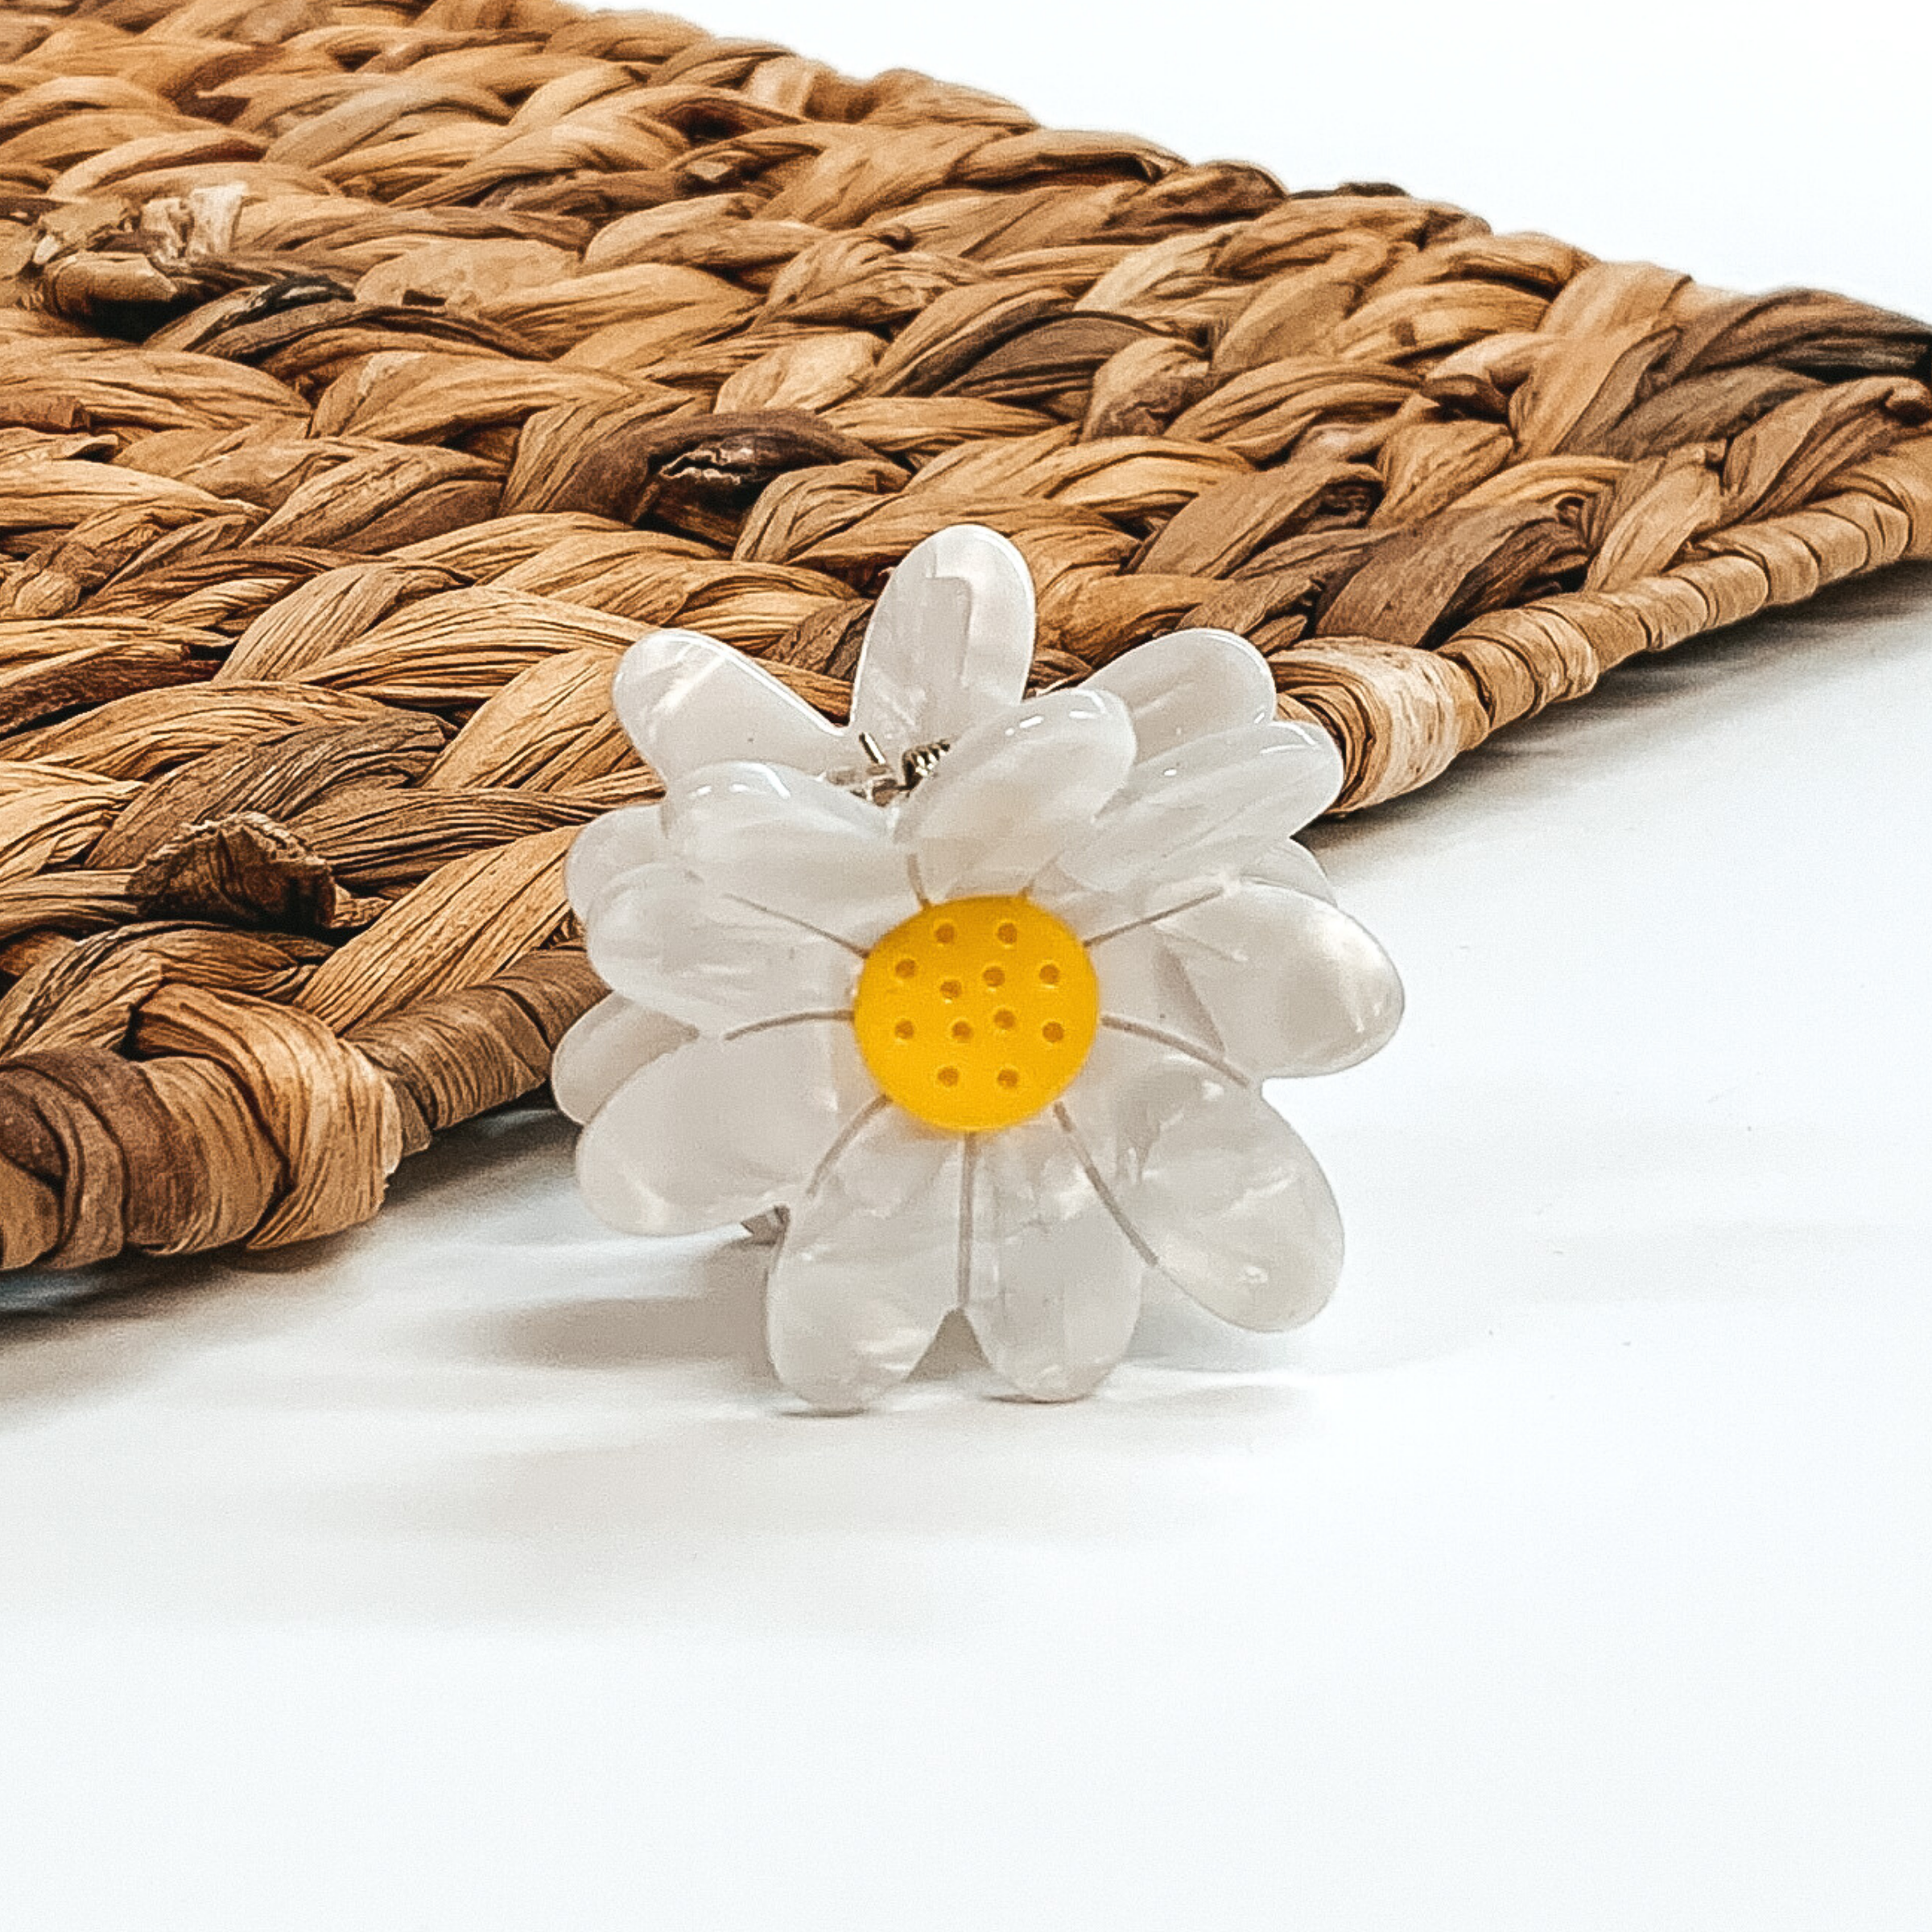 Flower shaped clip in white with a yellow center. This clip is pictured on a white background with a basket weave behind the clip.